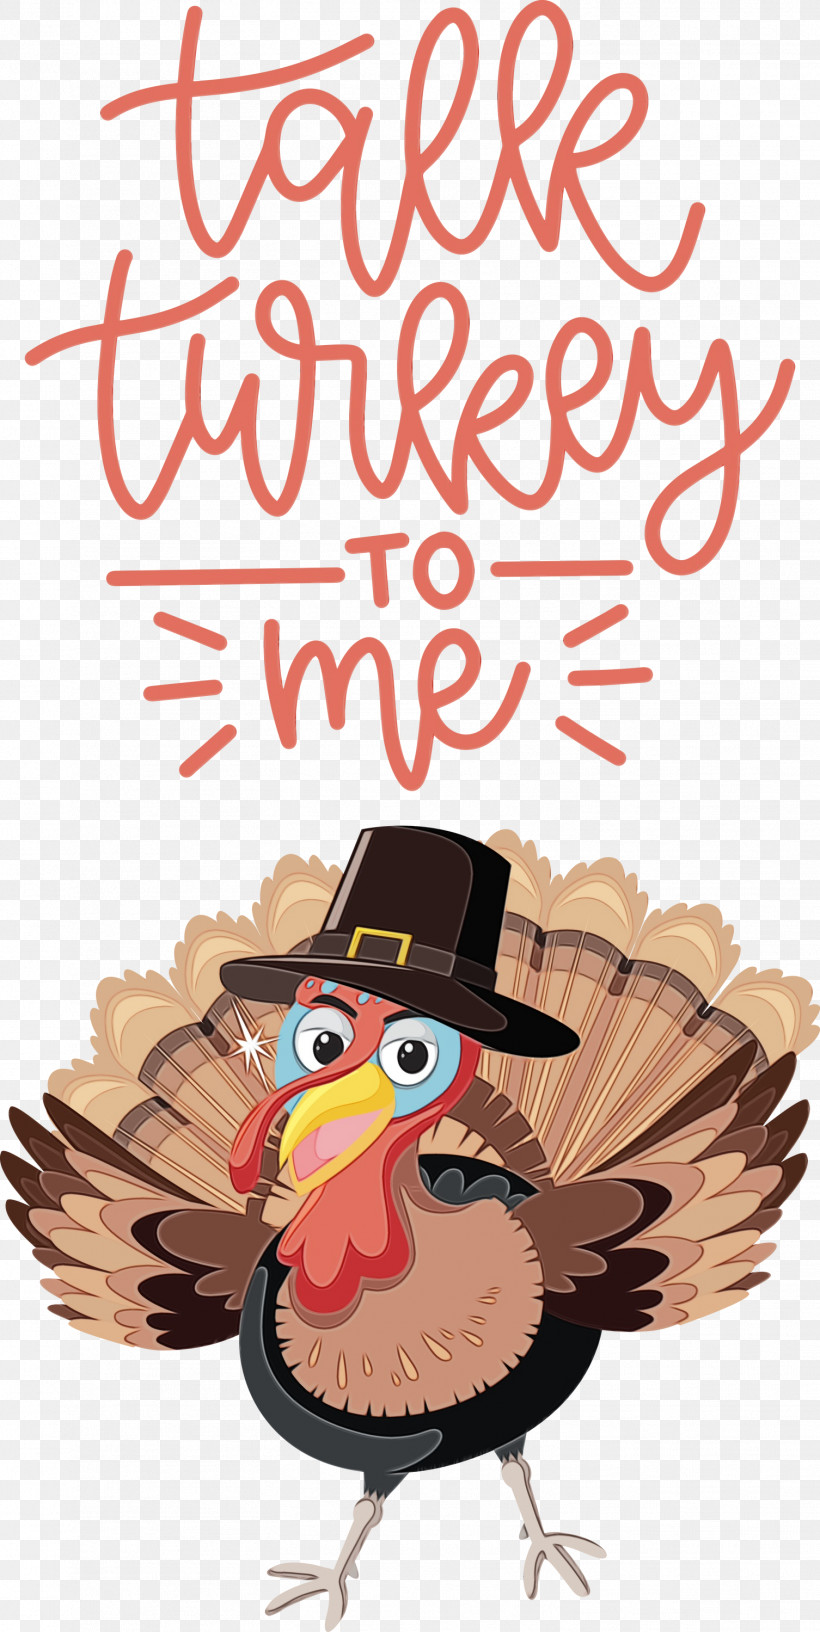 Chicken Birds Drawing Turkey Painting, PNG, 1506x2999px, Turkey, Birds, Cartoon, Chicken, Drawing Download Free